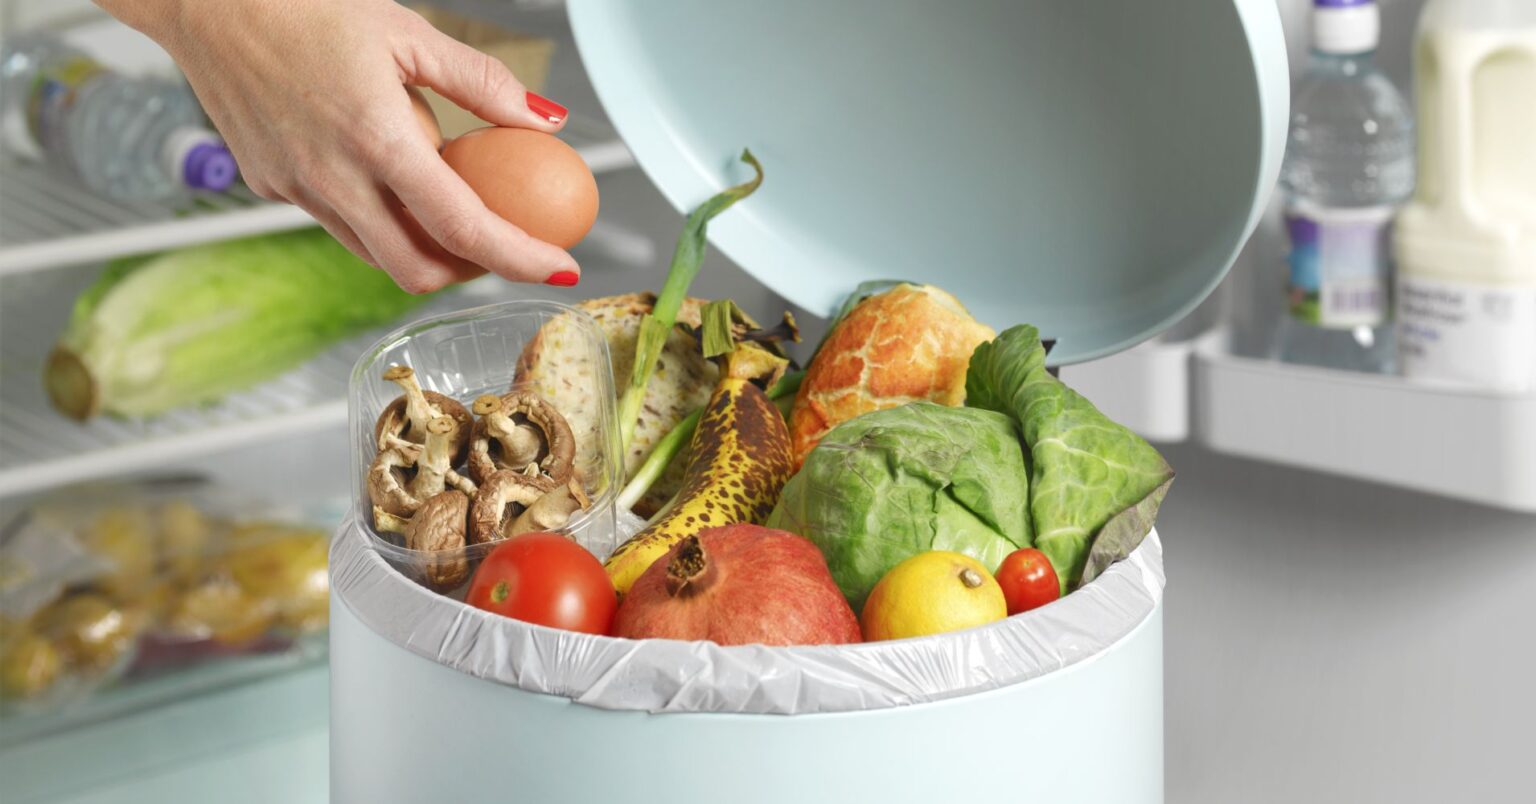 Make a Resolution for 2022 to Reduce Food Waste at Home To Make A ...